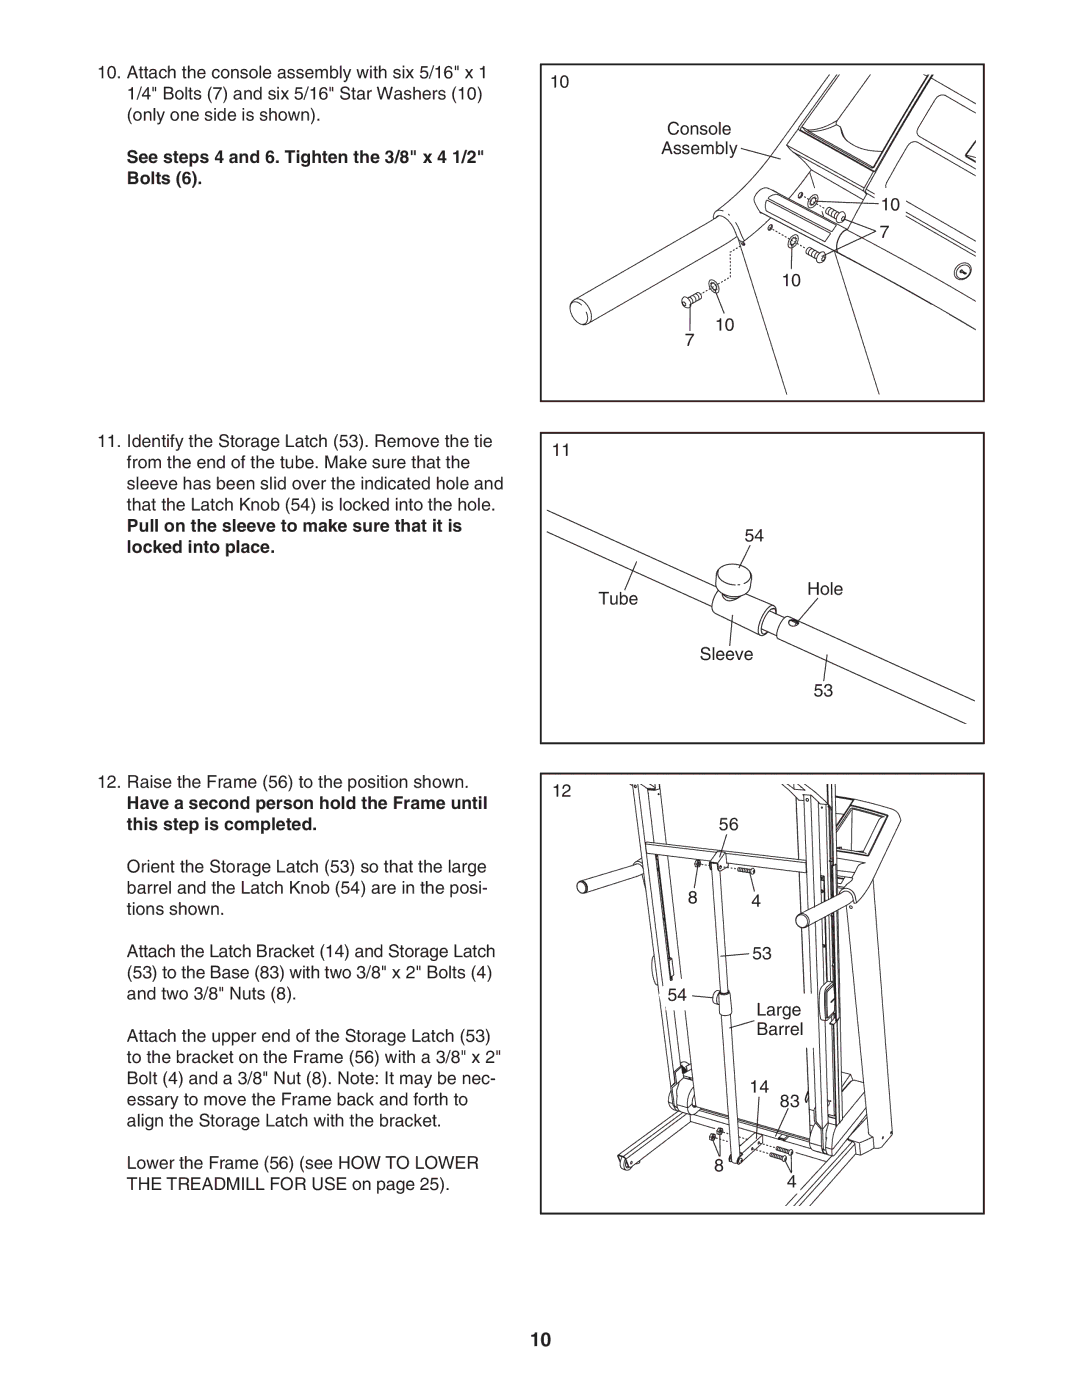 ProForm PFTL97007.0 user manual See steps 4 and 6. Tighten the 3/8 x 4 1/2, Bolts 